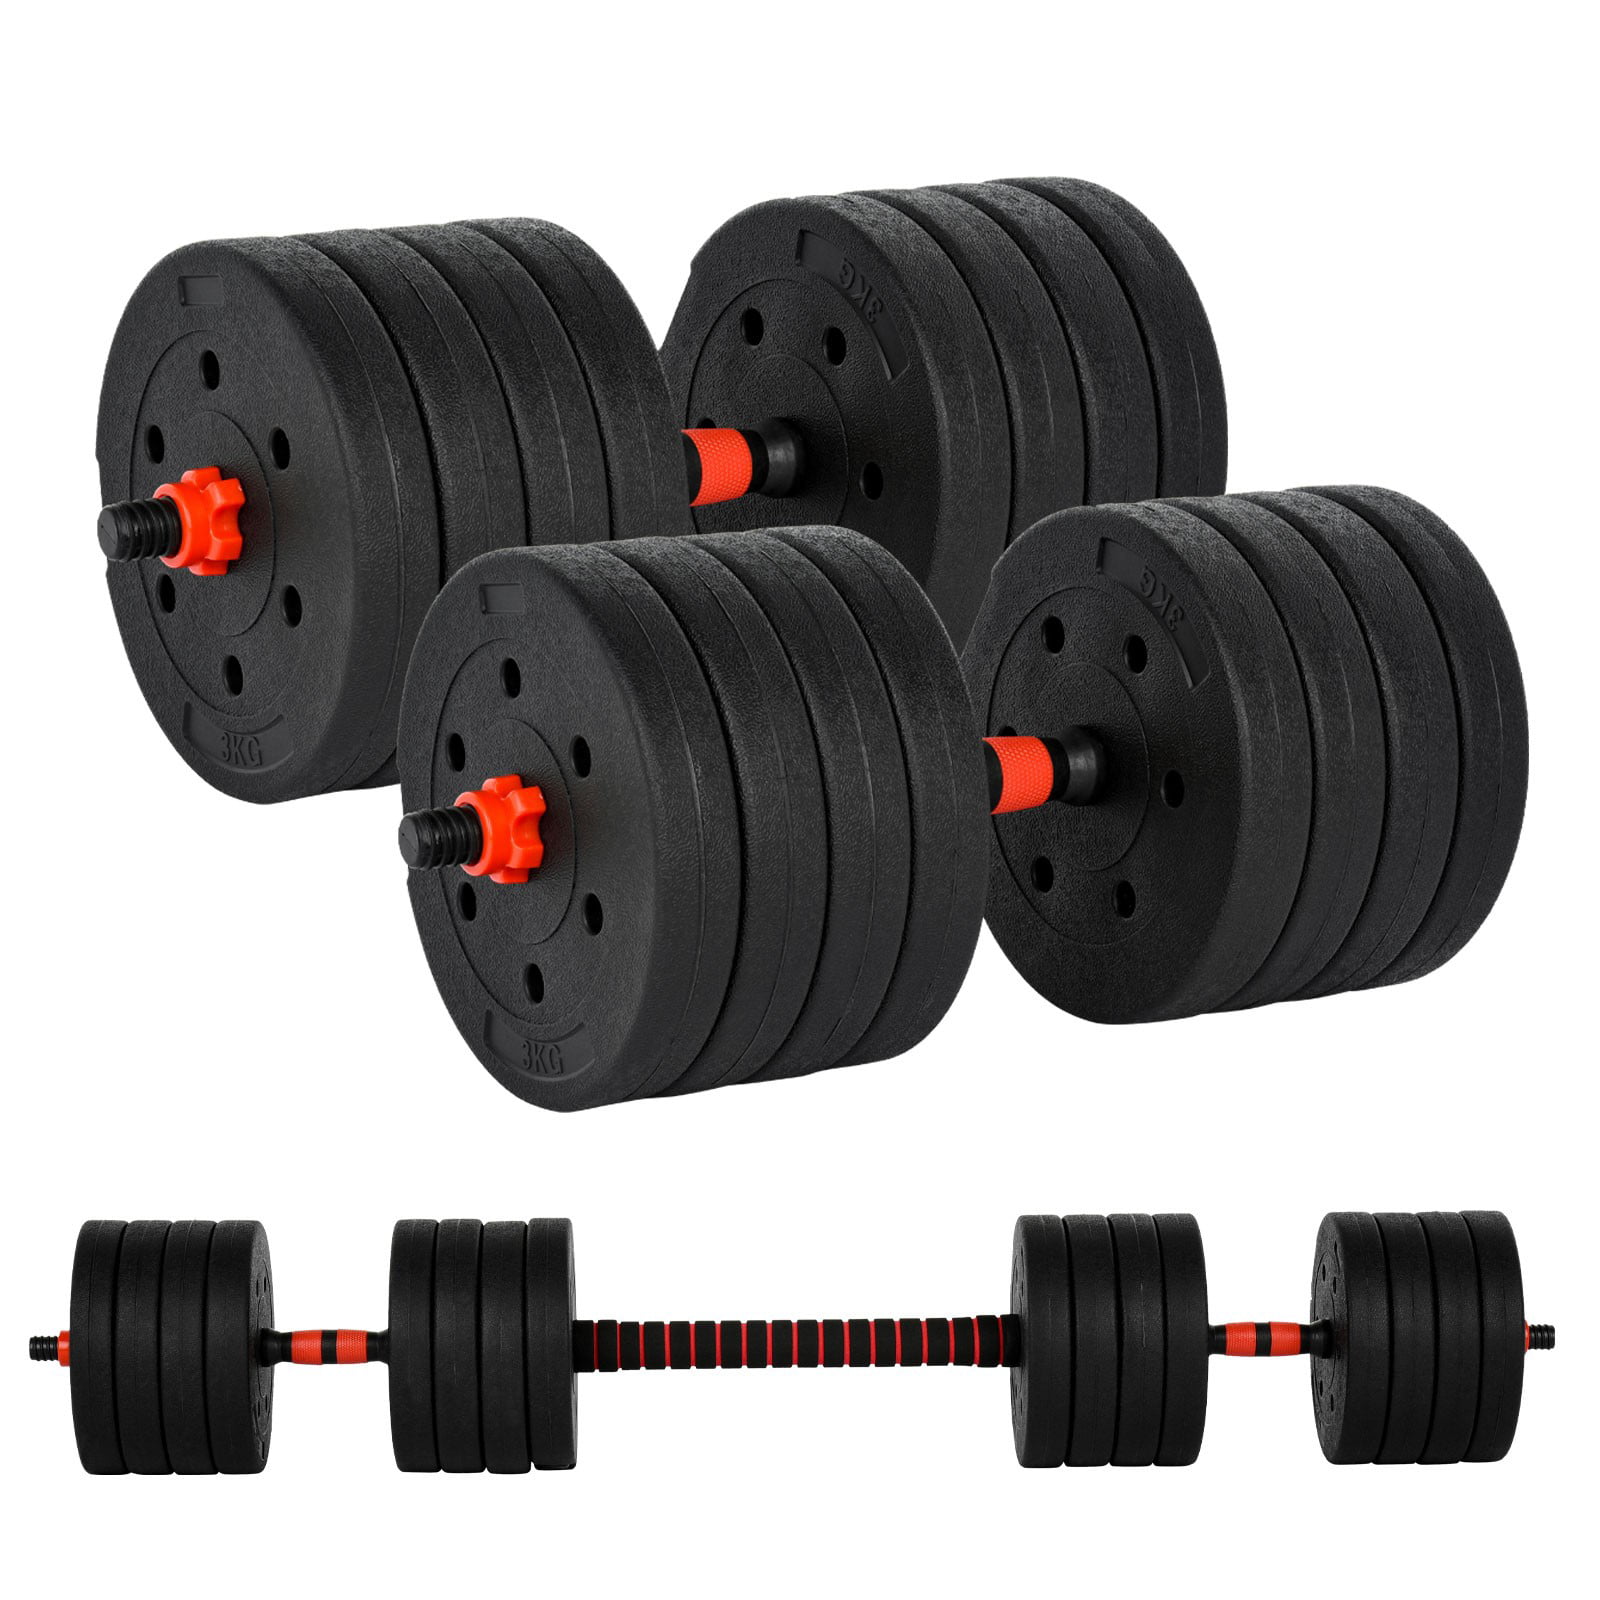 Details about   USA warehouse 52.5LBS Adjustable Dumbbells Weight Sets Exercise Equipment 